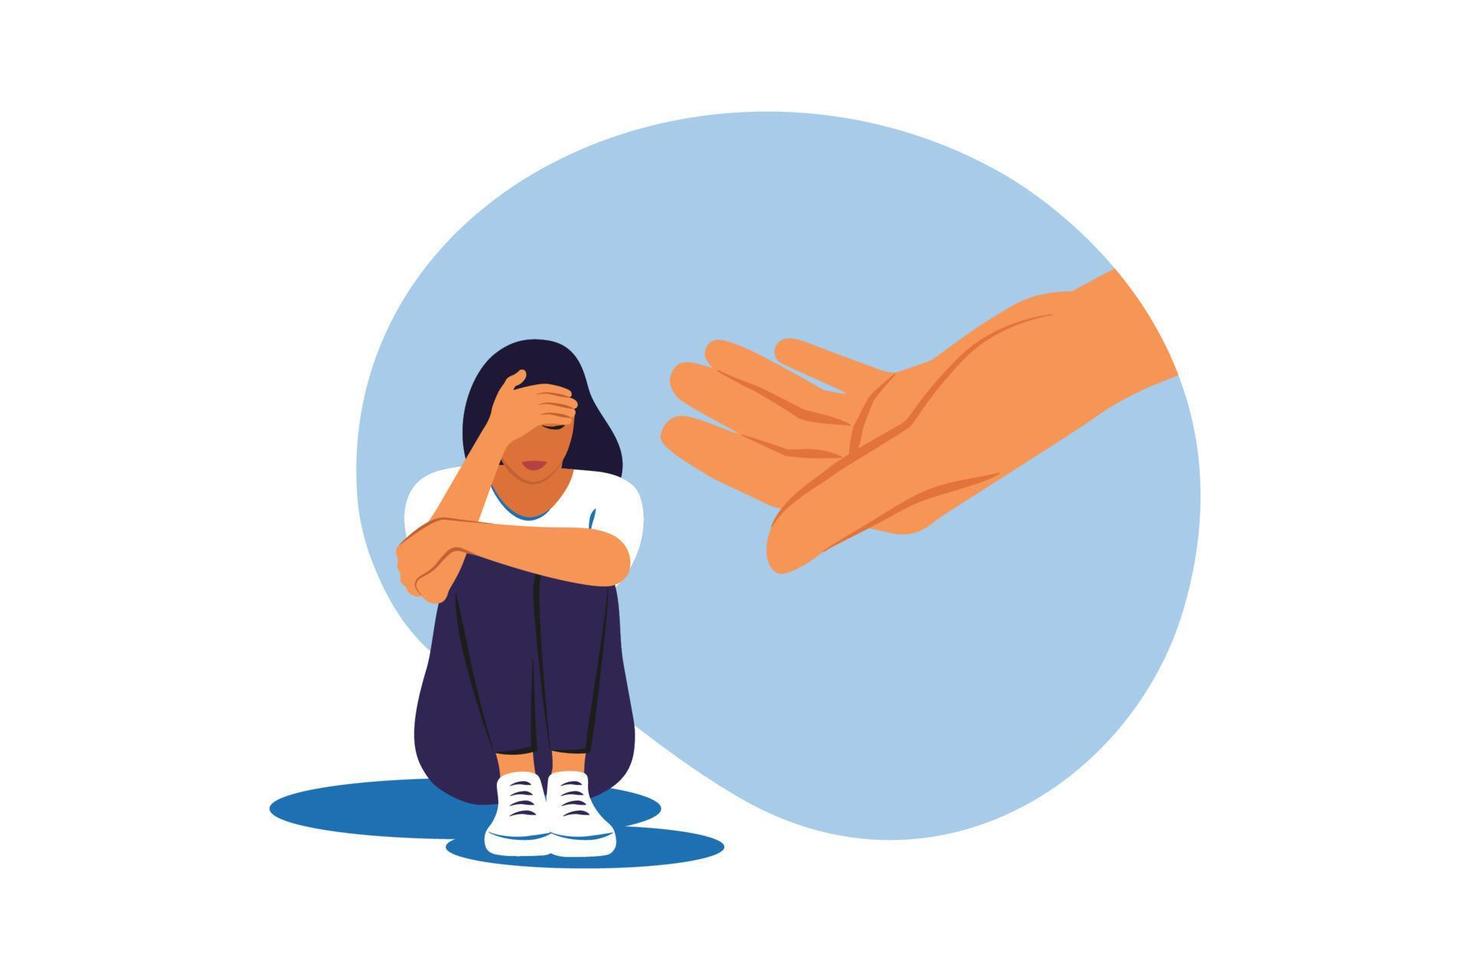 Human hand helps depression girl hugging knees. Psychotherapy, counseling and psychological support concept. Vector illustration.